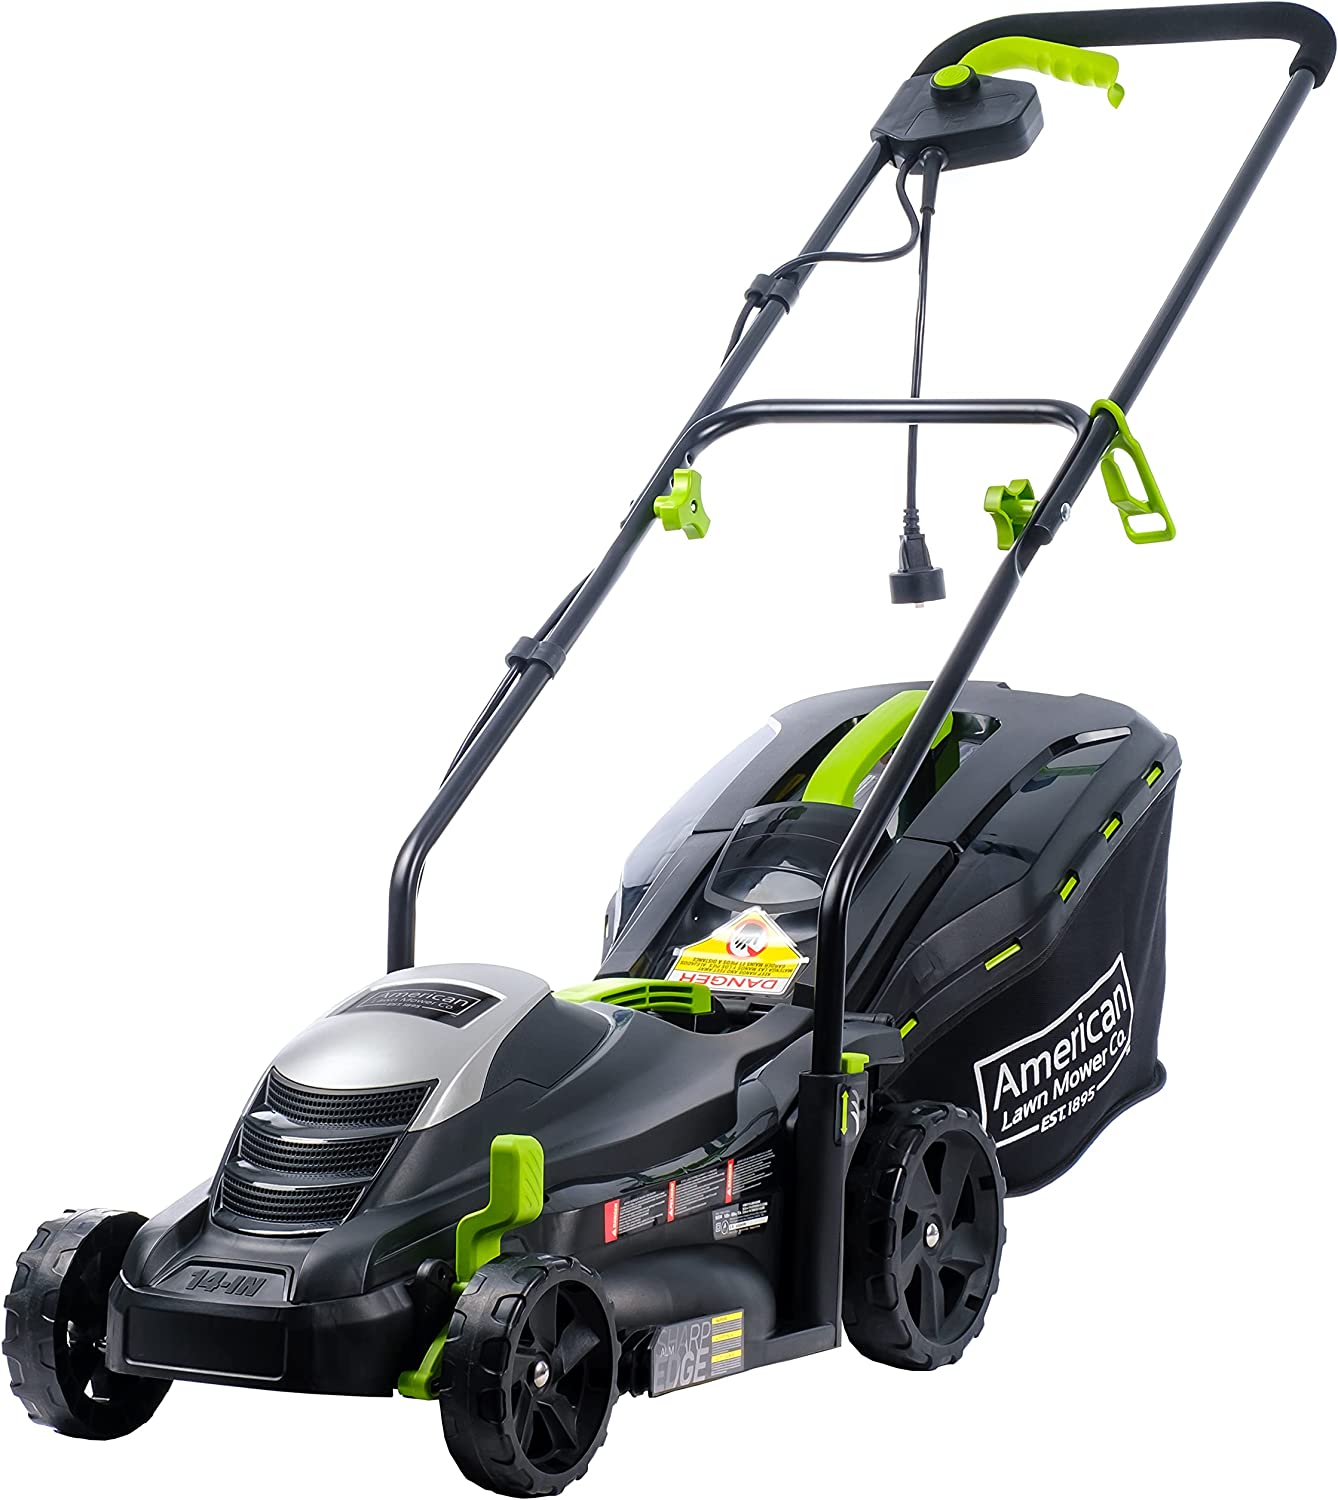 American Lawn Mower Company Corded Electric Lawn Mower – Just $145.32 at Amazon